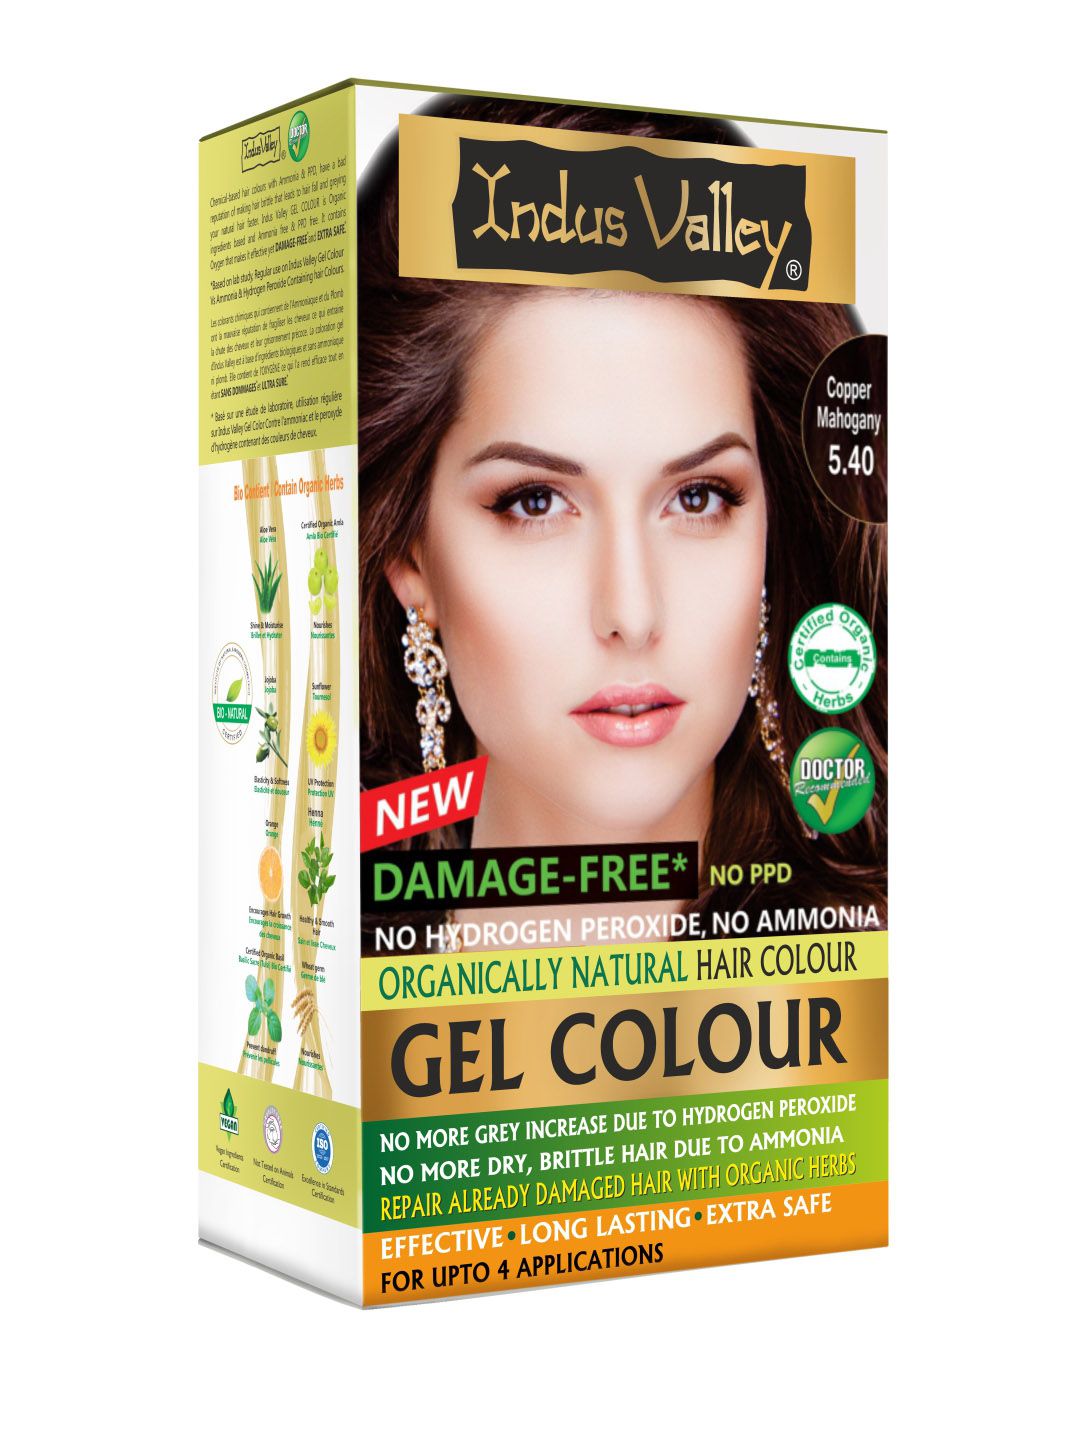 Indus Valley Organically Natural Gel Copper Mahogany 5.4 Hair Color 220 g Price in India